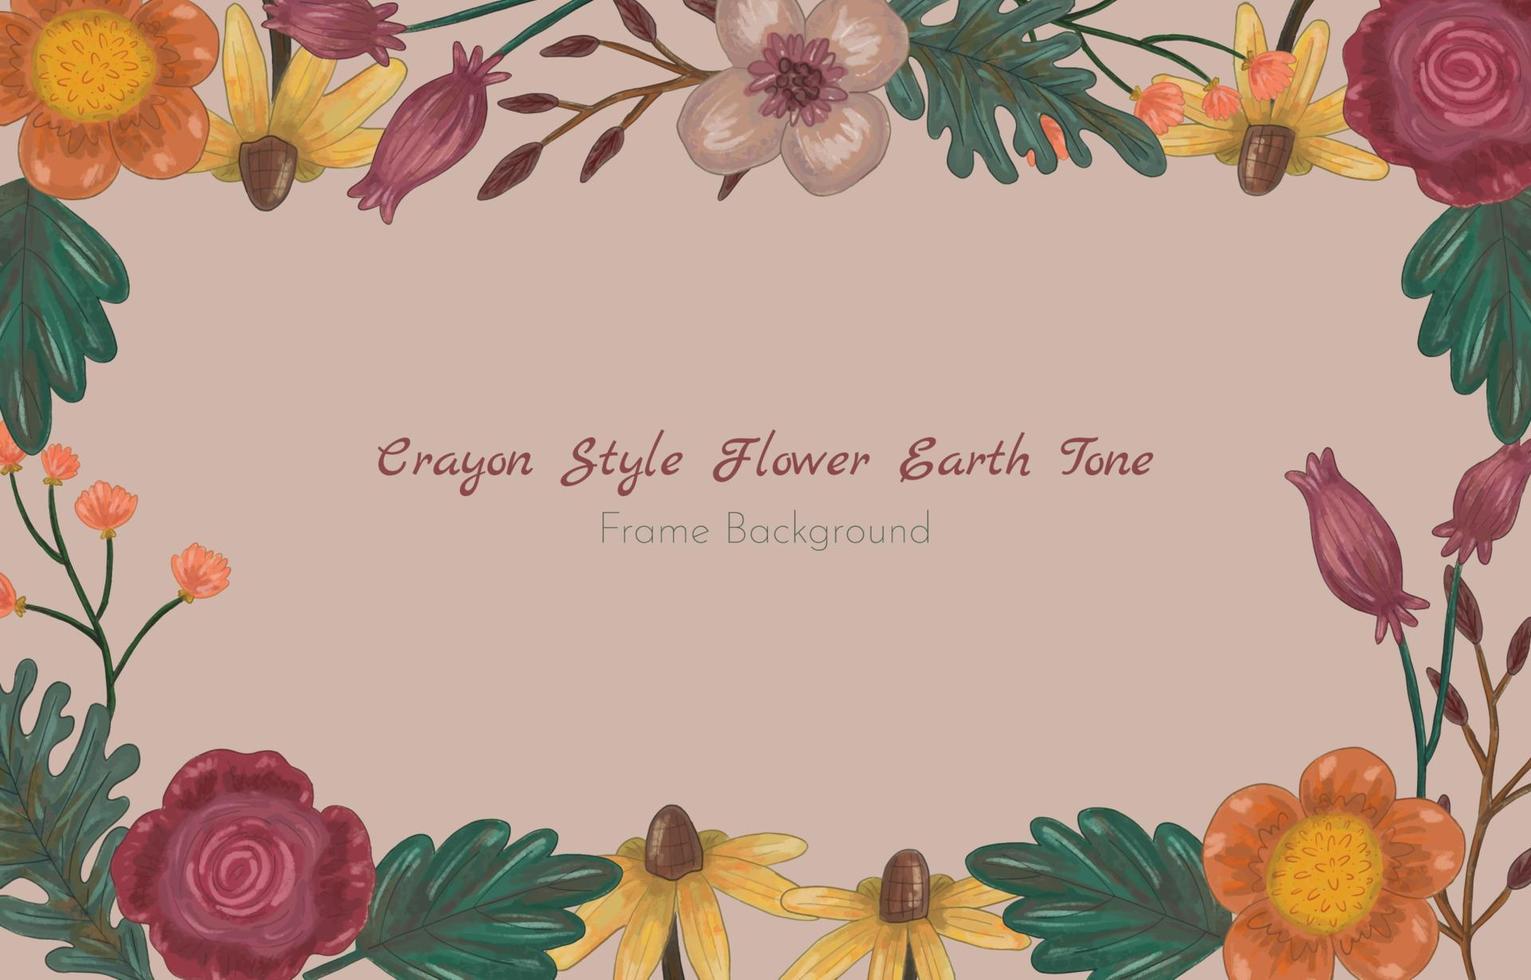 Crayon Style Flower Earth Tone Frame Background vector